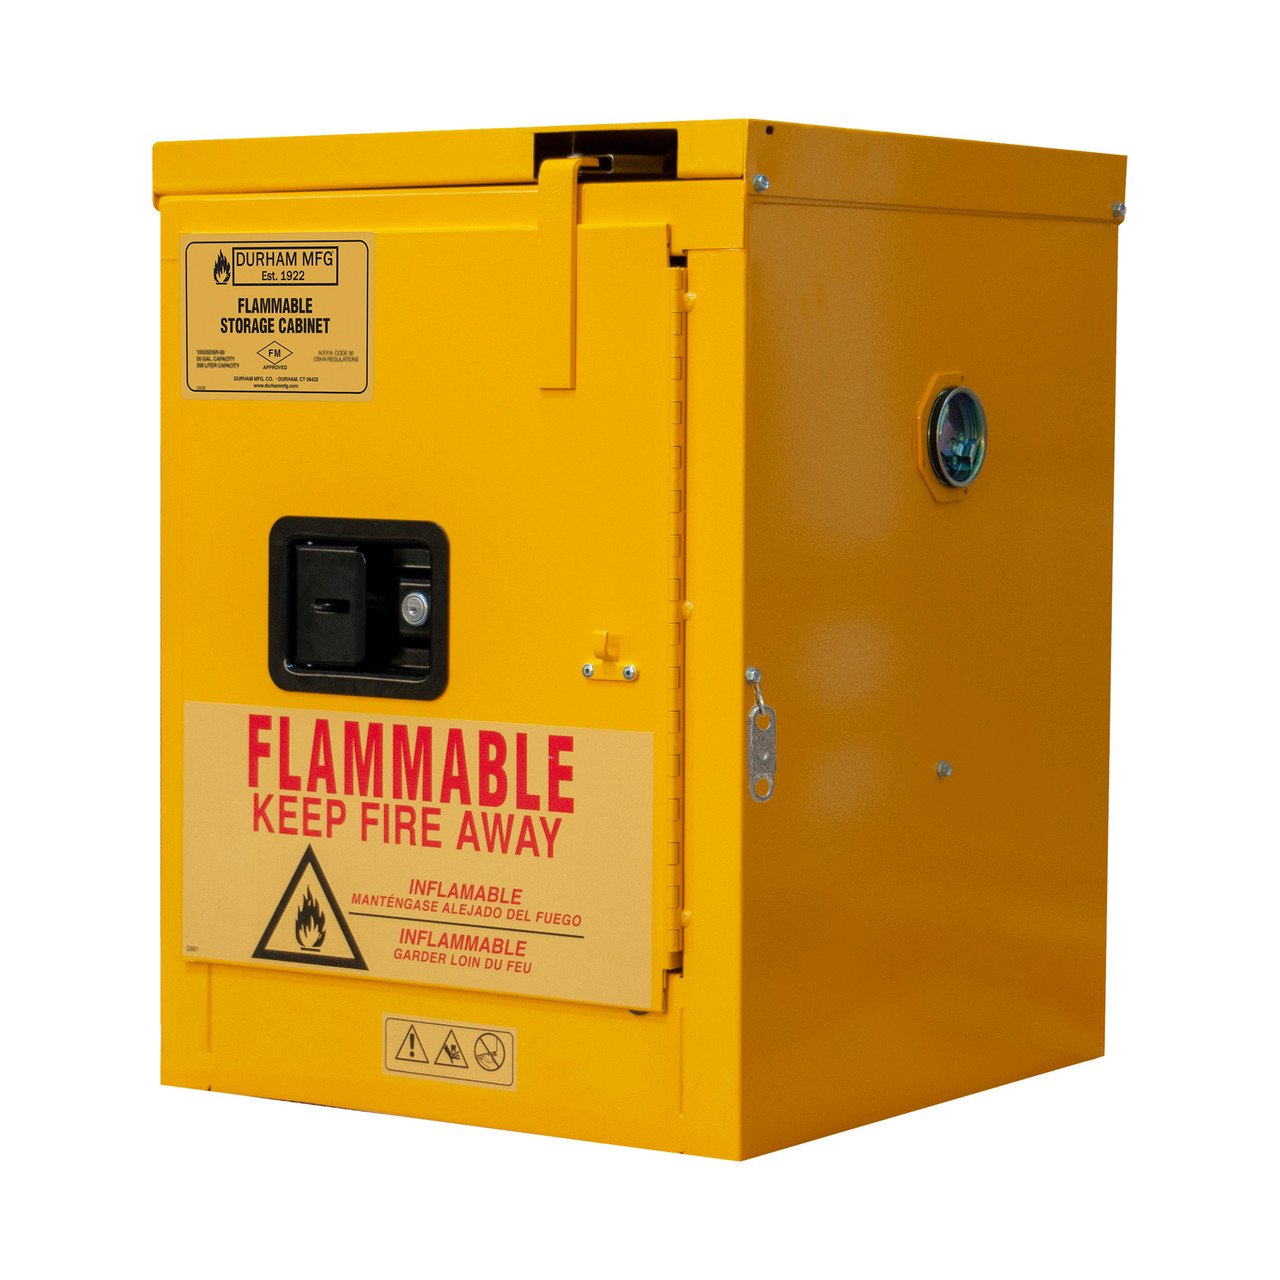 FM Approved, Flammable Storage Cabinet, 4 Gallon, 1 Door, Self Close, 1 Shelf, Safety Yellow